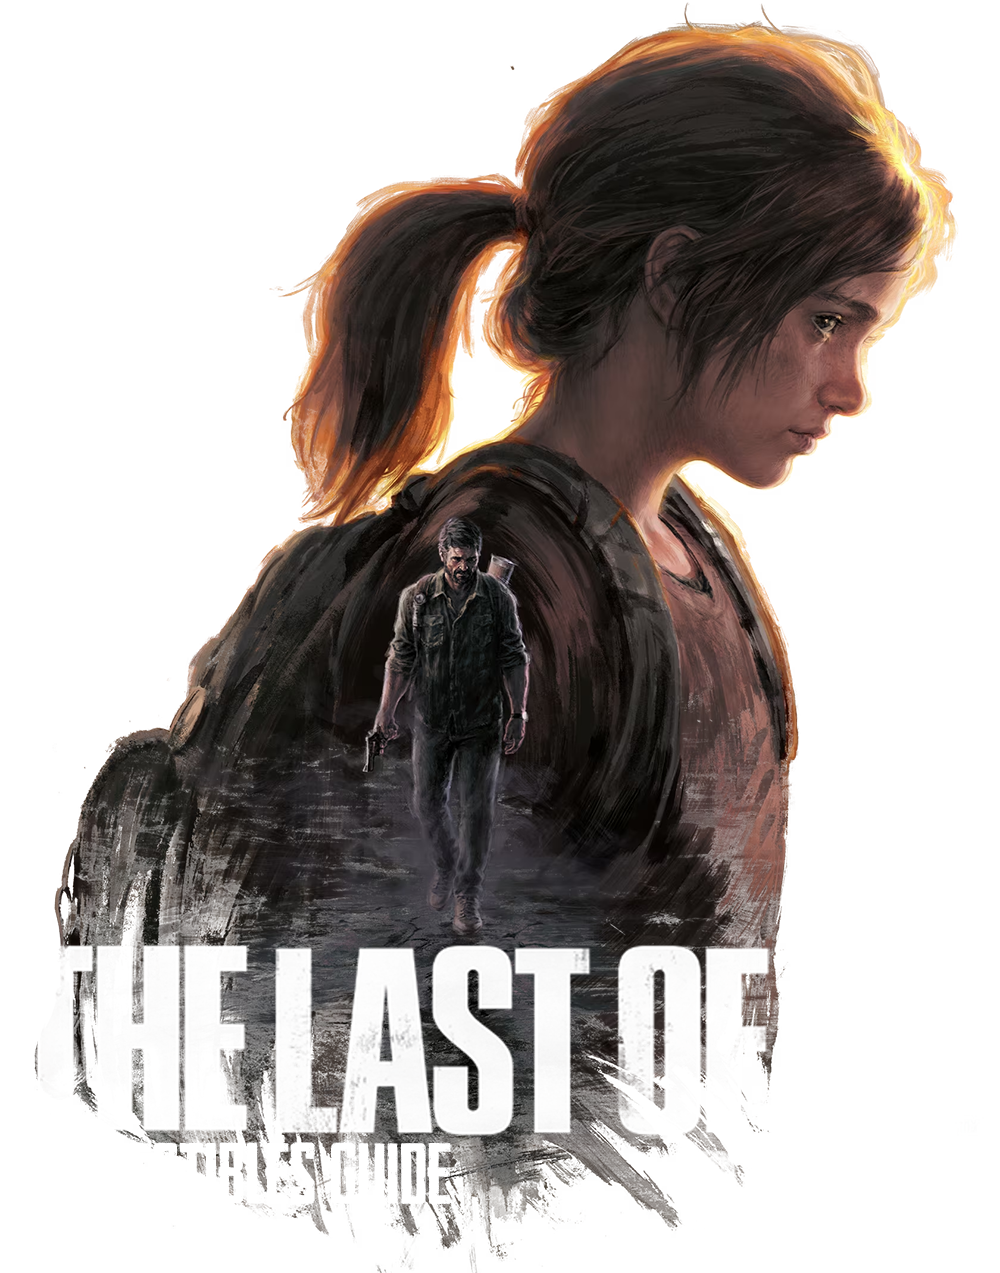 The Last of Us Part 2 walkthrough, collectibles and items locations guide